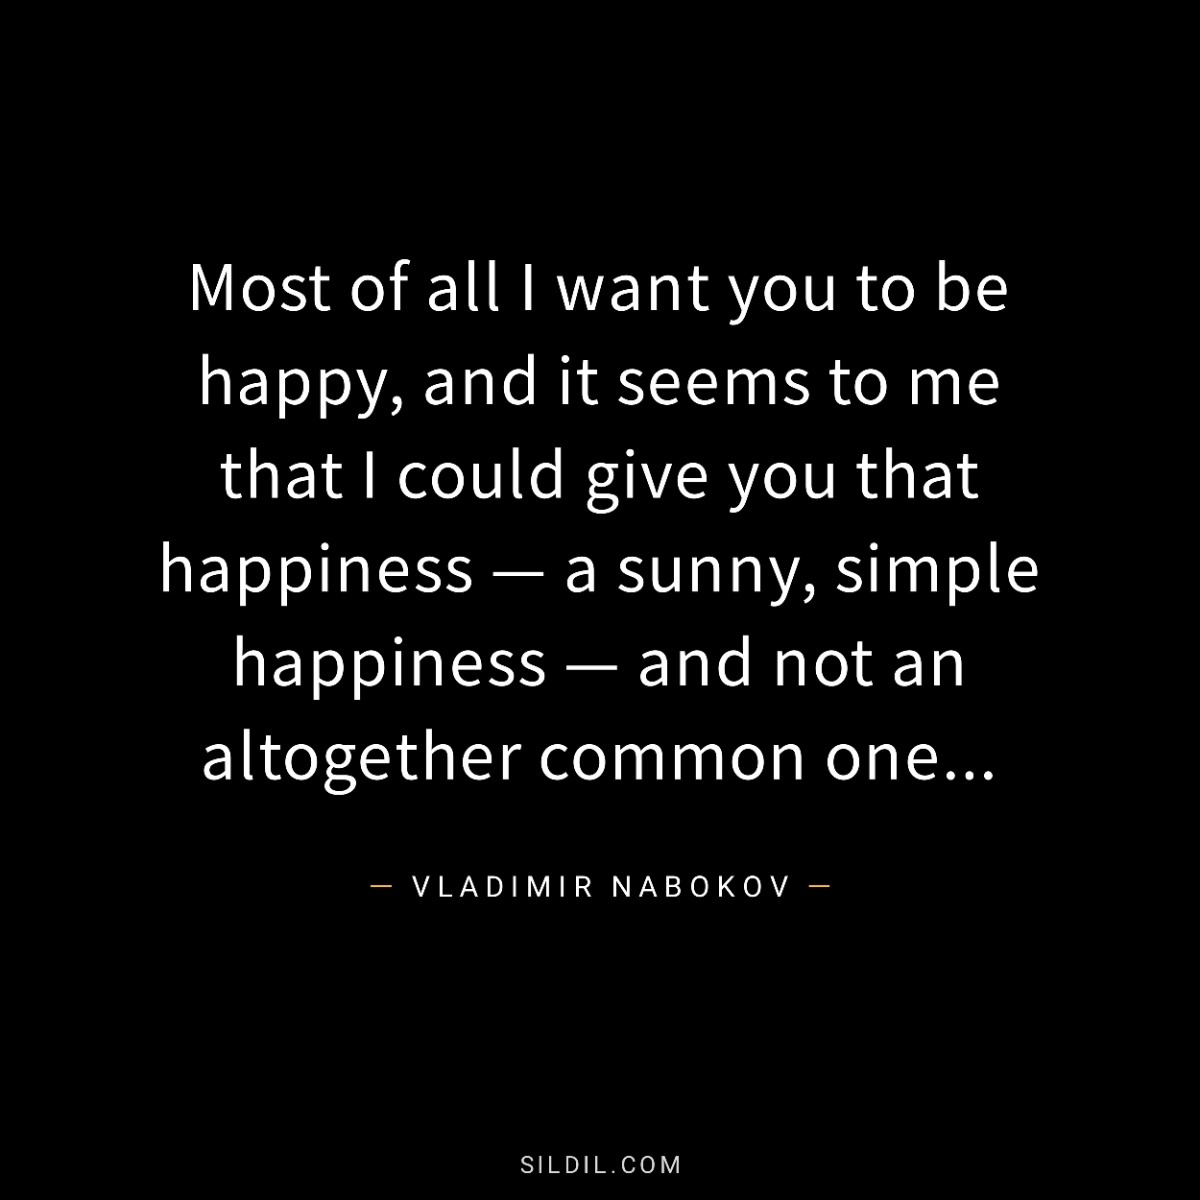 Most of all I want you to be happy, and it seems to me that I could give you that happiness — a sunny, simple happiness — and not an altogether common one…